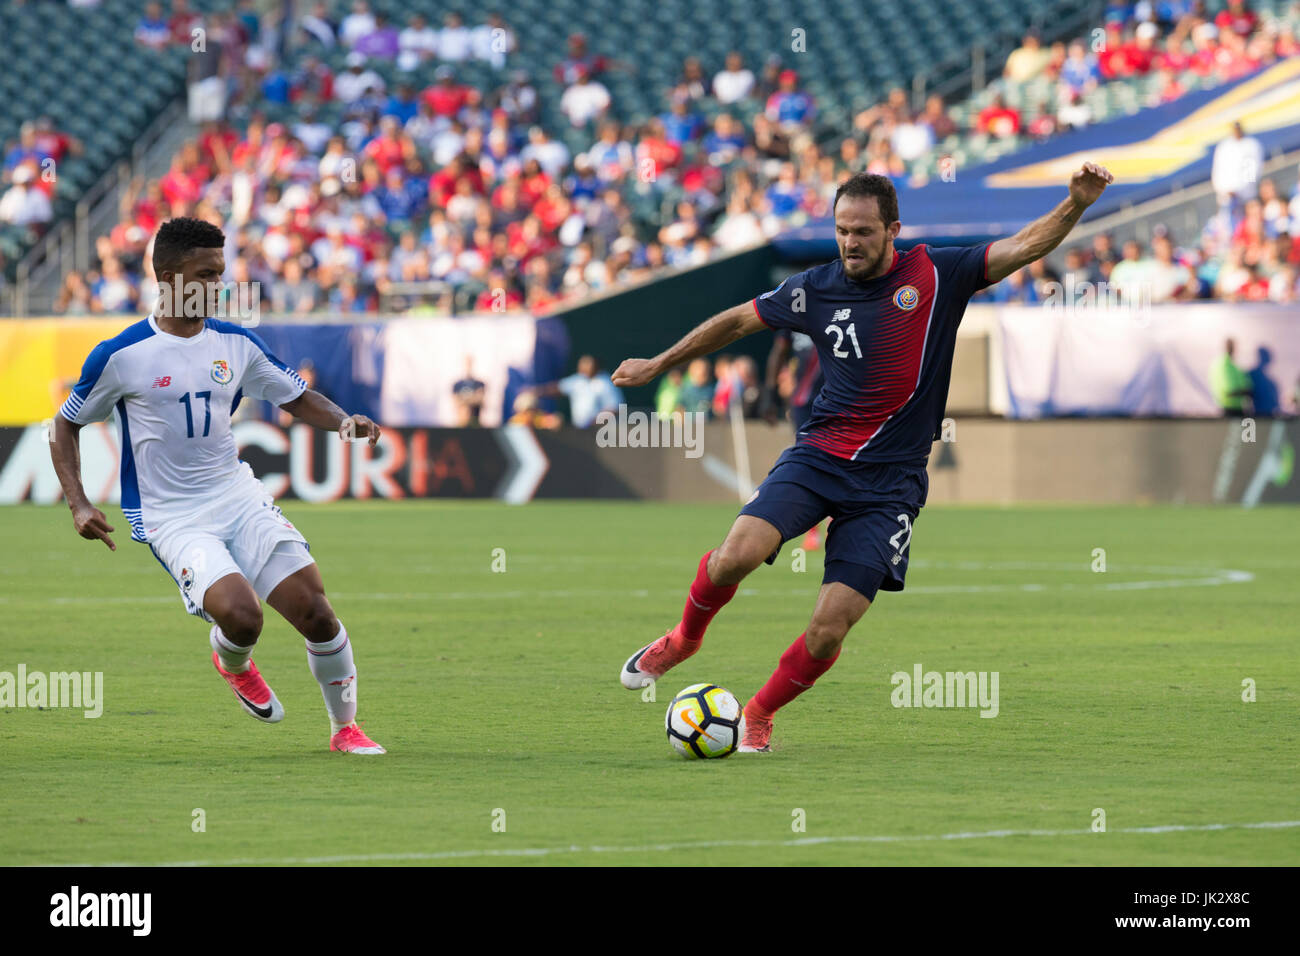 Philadelphia, PA USA - July 19, 2017: Marco Urena (21) of Panama defends during 2017 Gold Cup quaterfinal game against Costa Rica Costa Rica won 1 - 0 Stock Photo